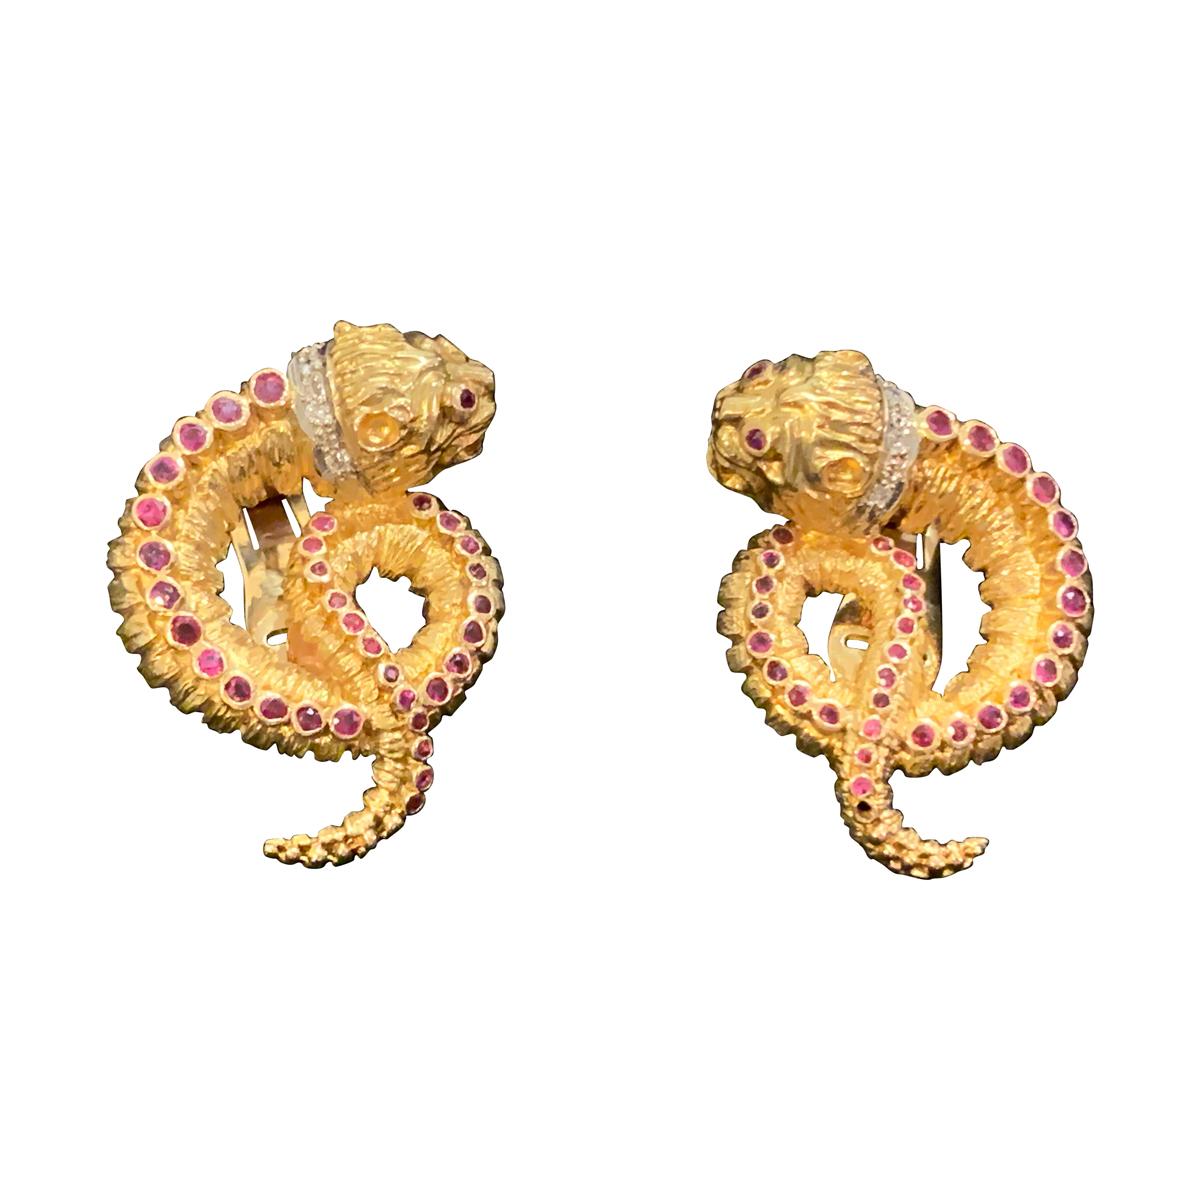 Earrings by Ilia’s Lalaounis Chimera 17.3dwt 18-Karat, Rubies and Diamonds For Sale